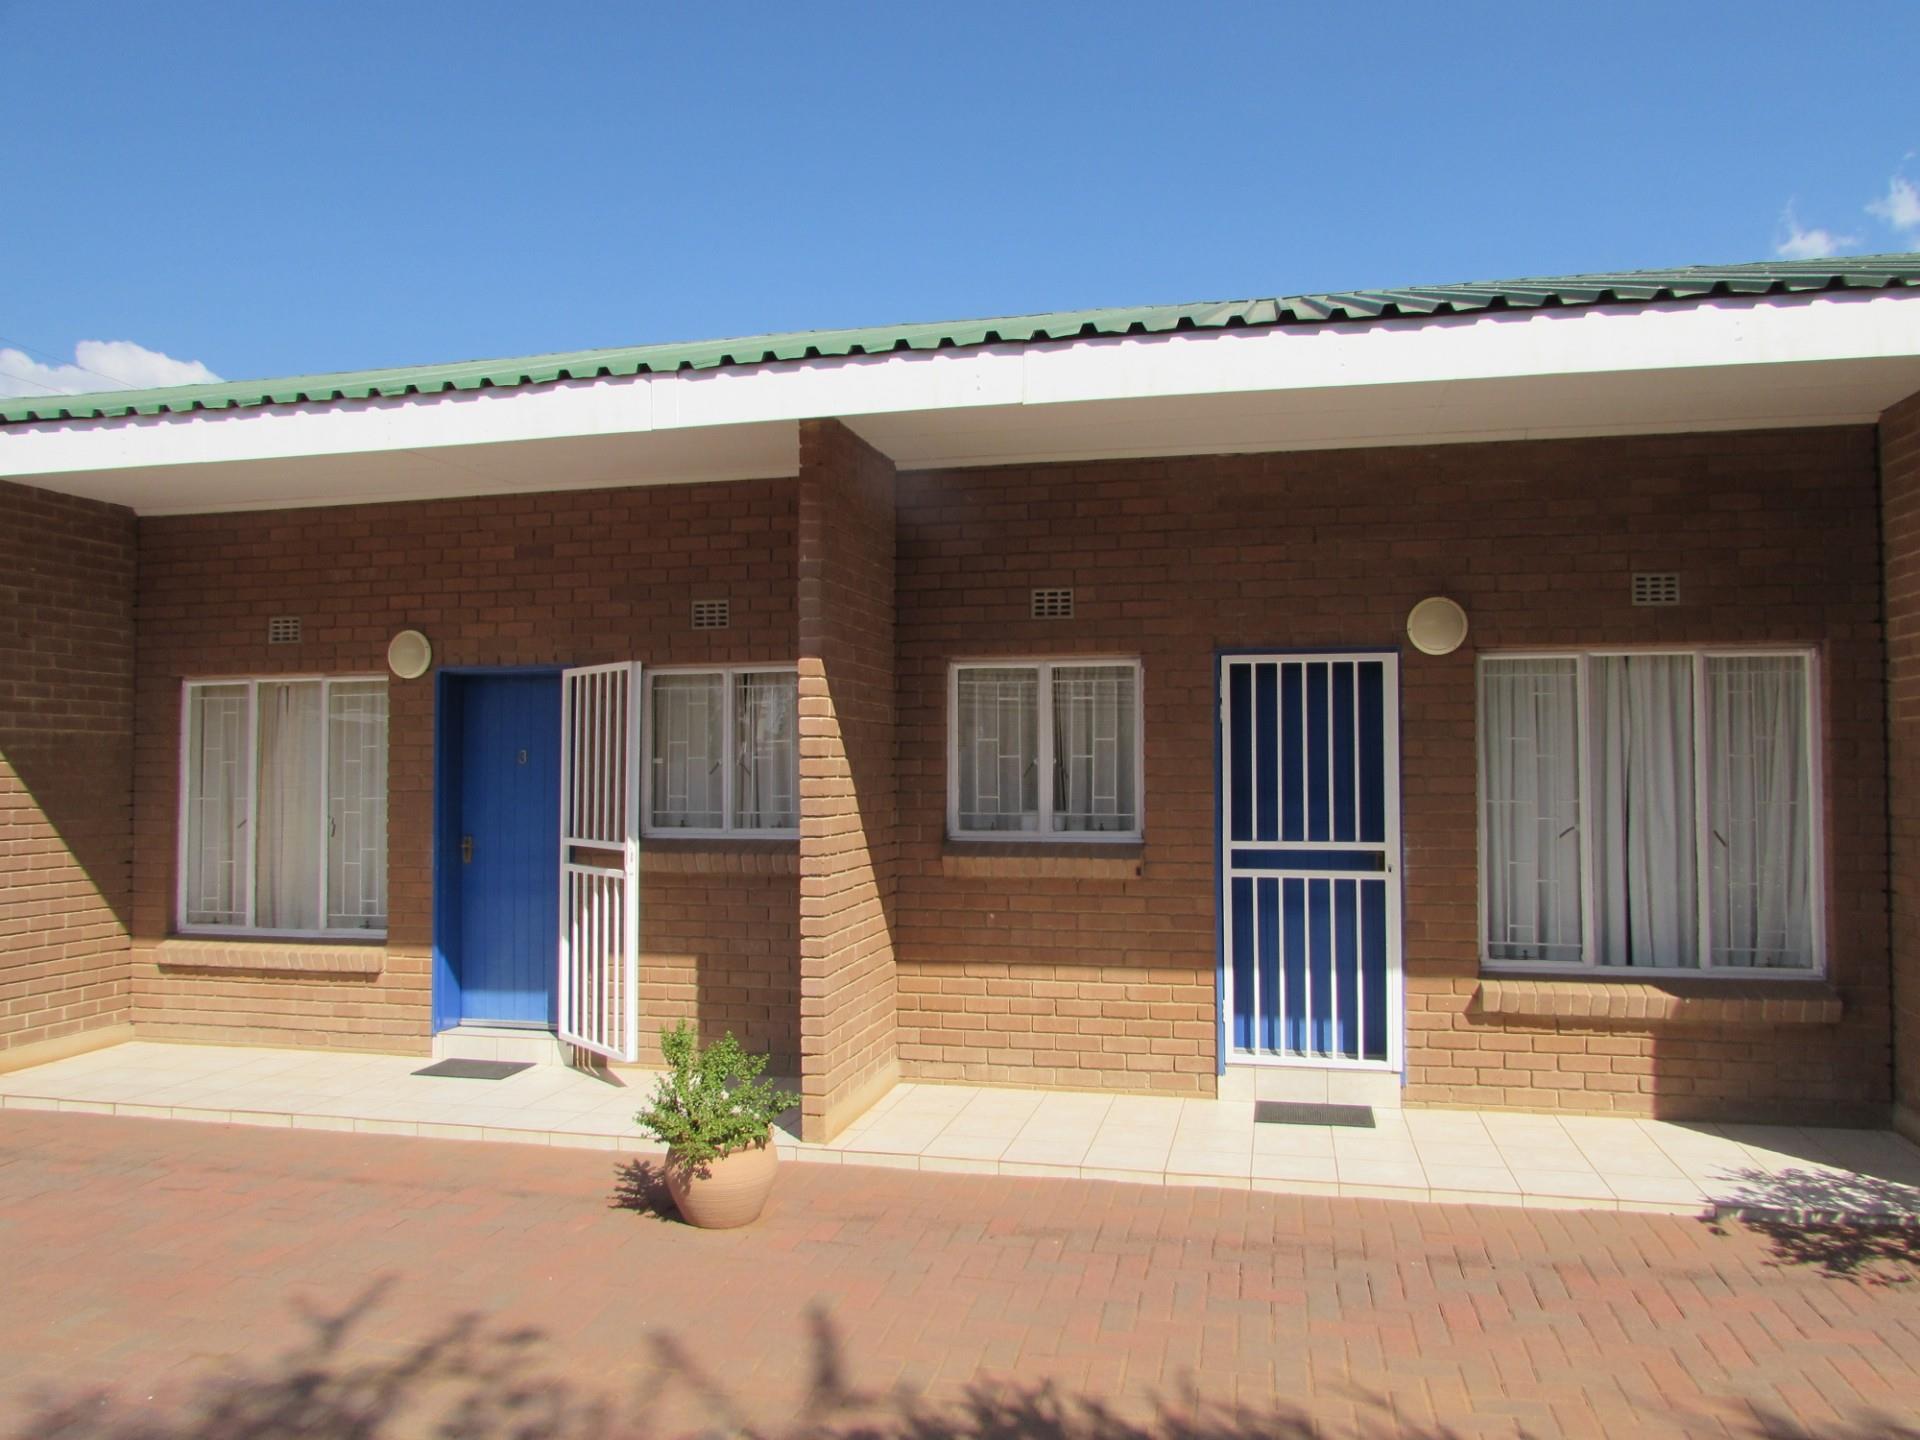 Minimalist Apartments For Sale In Gaborone for Simple Design